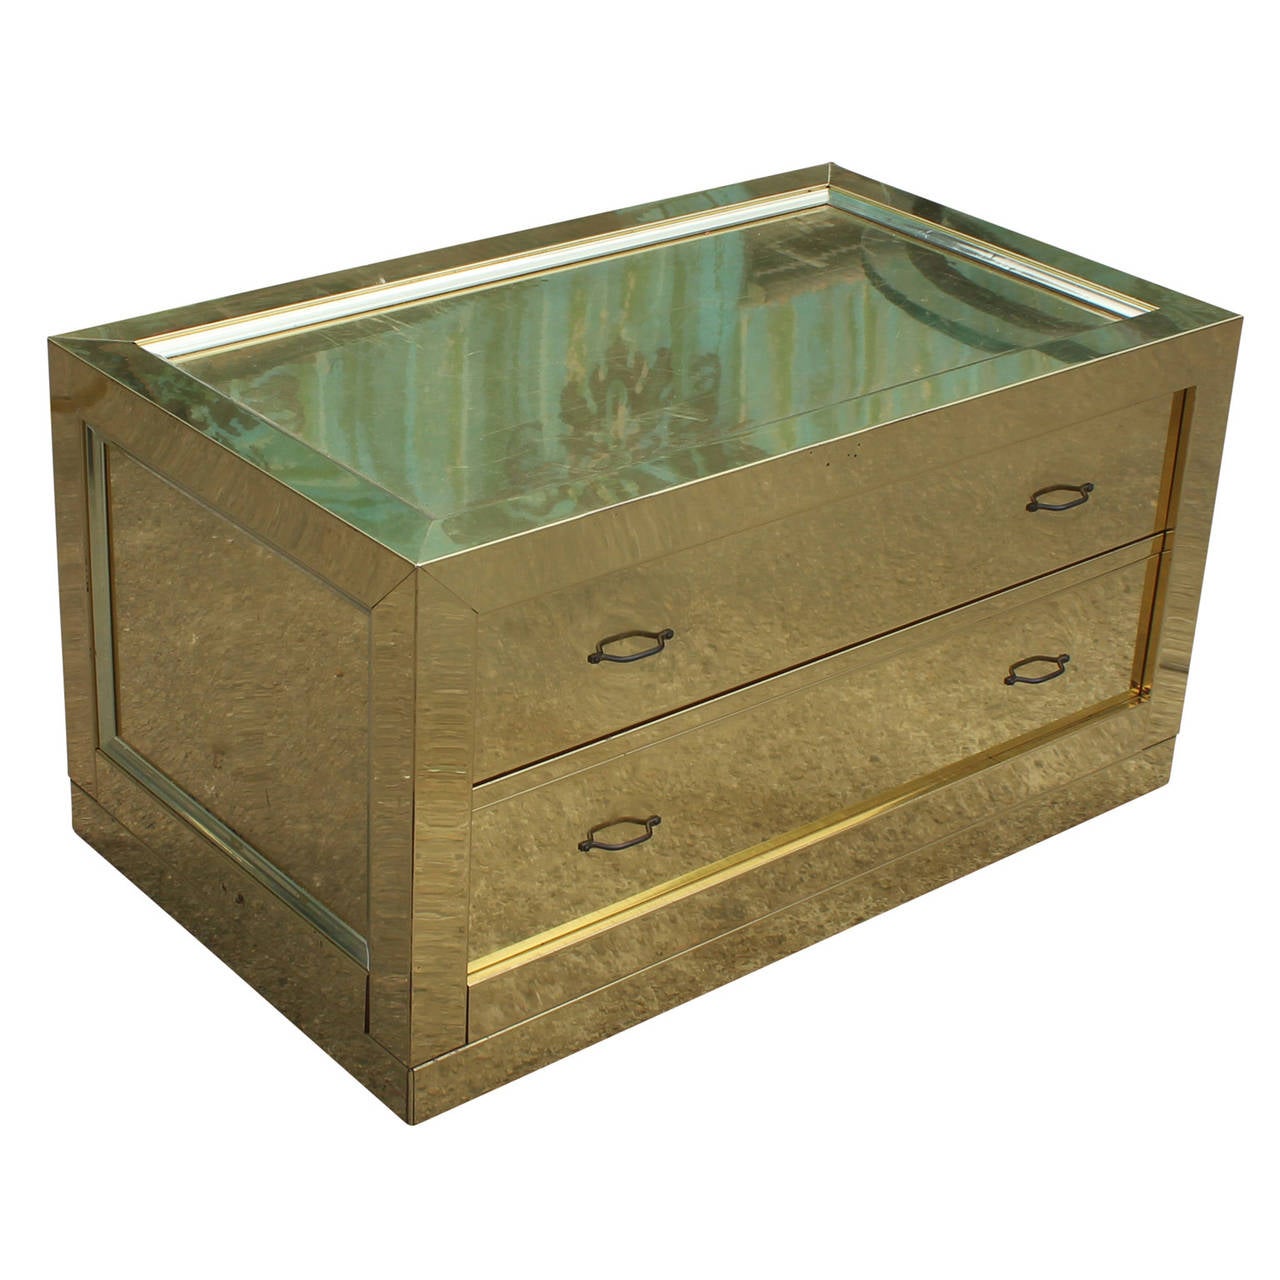 Wonderful little chest covered in brass. Chest has two drawers with simple hardware. Top has some slight scratches.